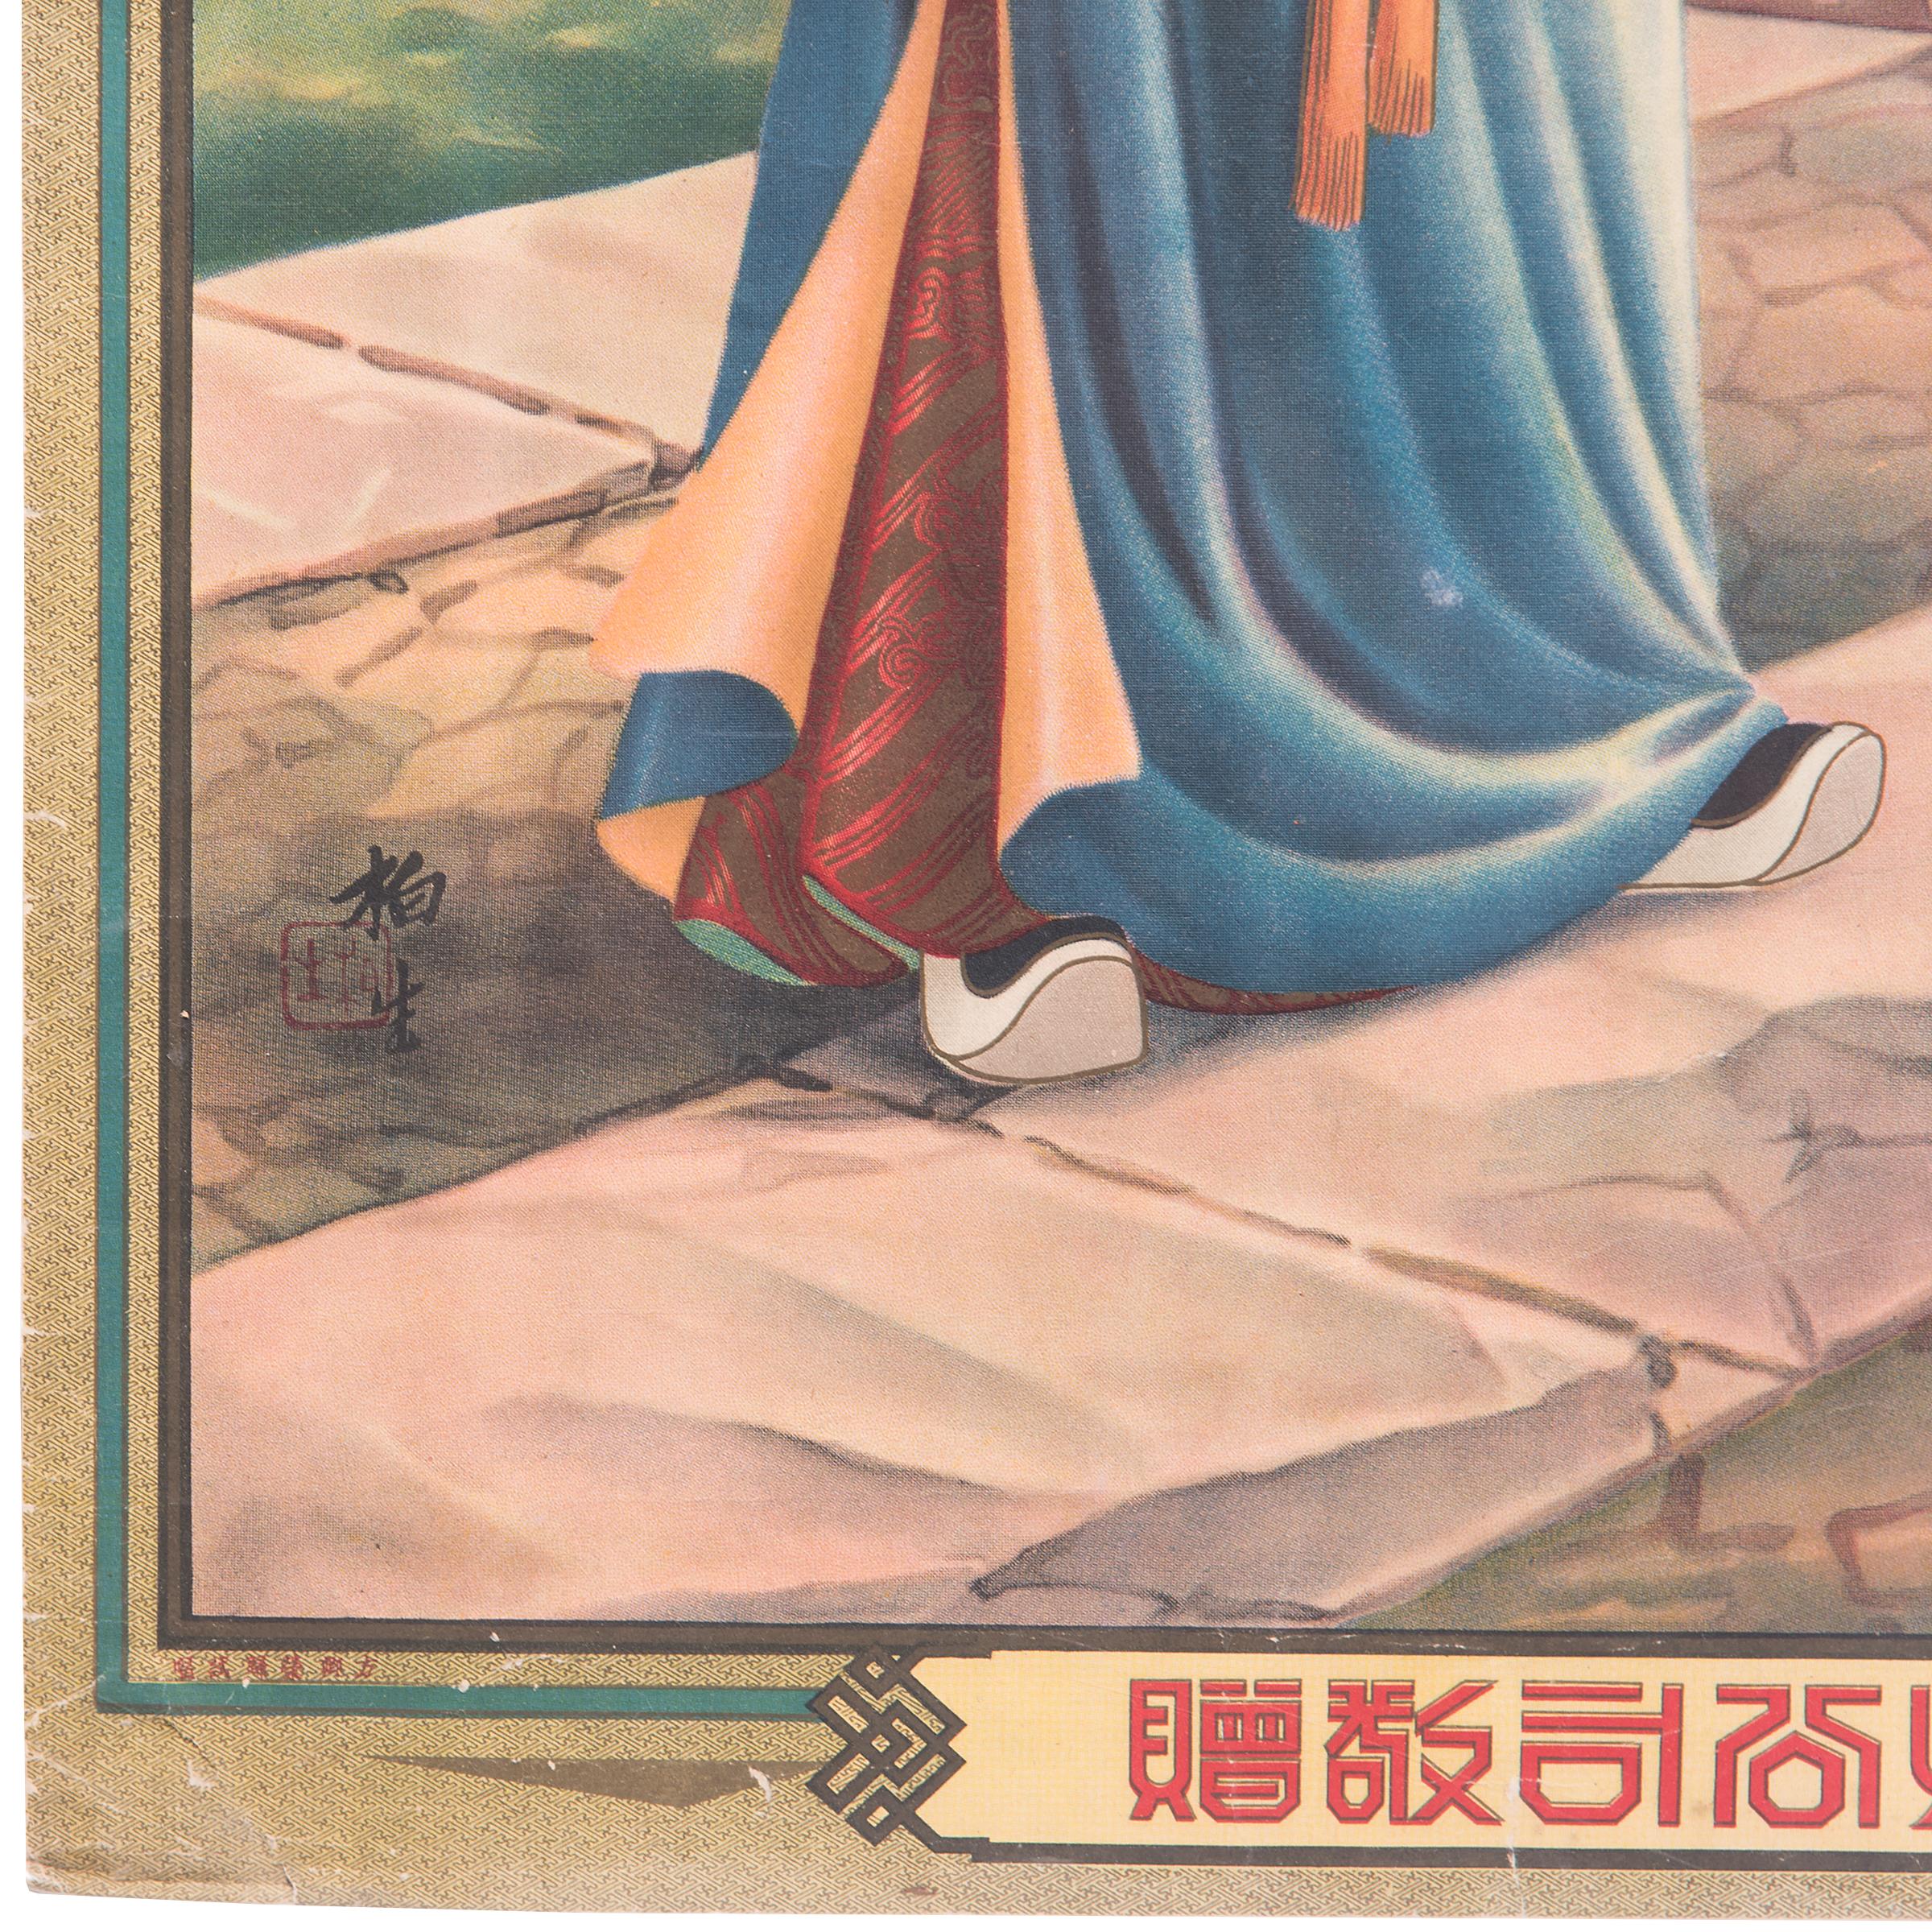 Vintage Chinese Cigarette Advertisement Poster, c. 1930s In Good Condition For Sale In Chicago, IL